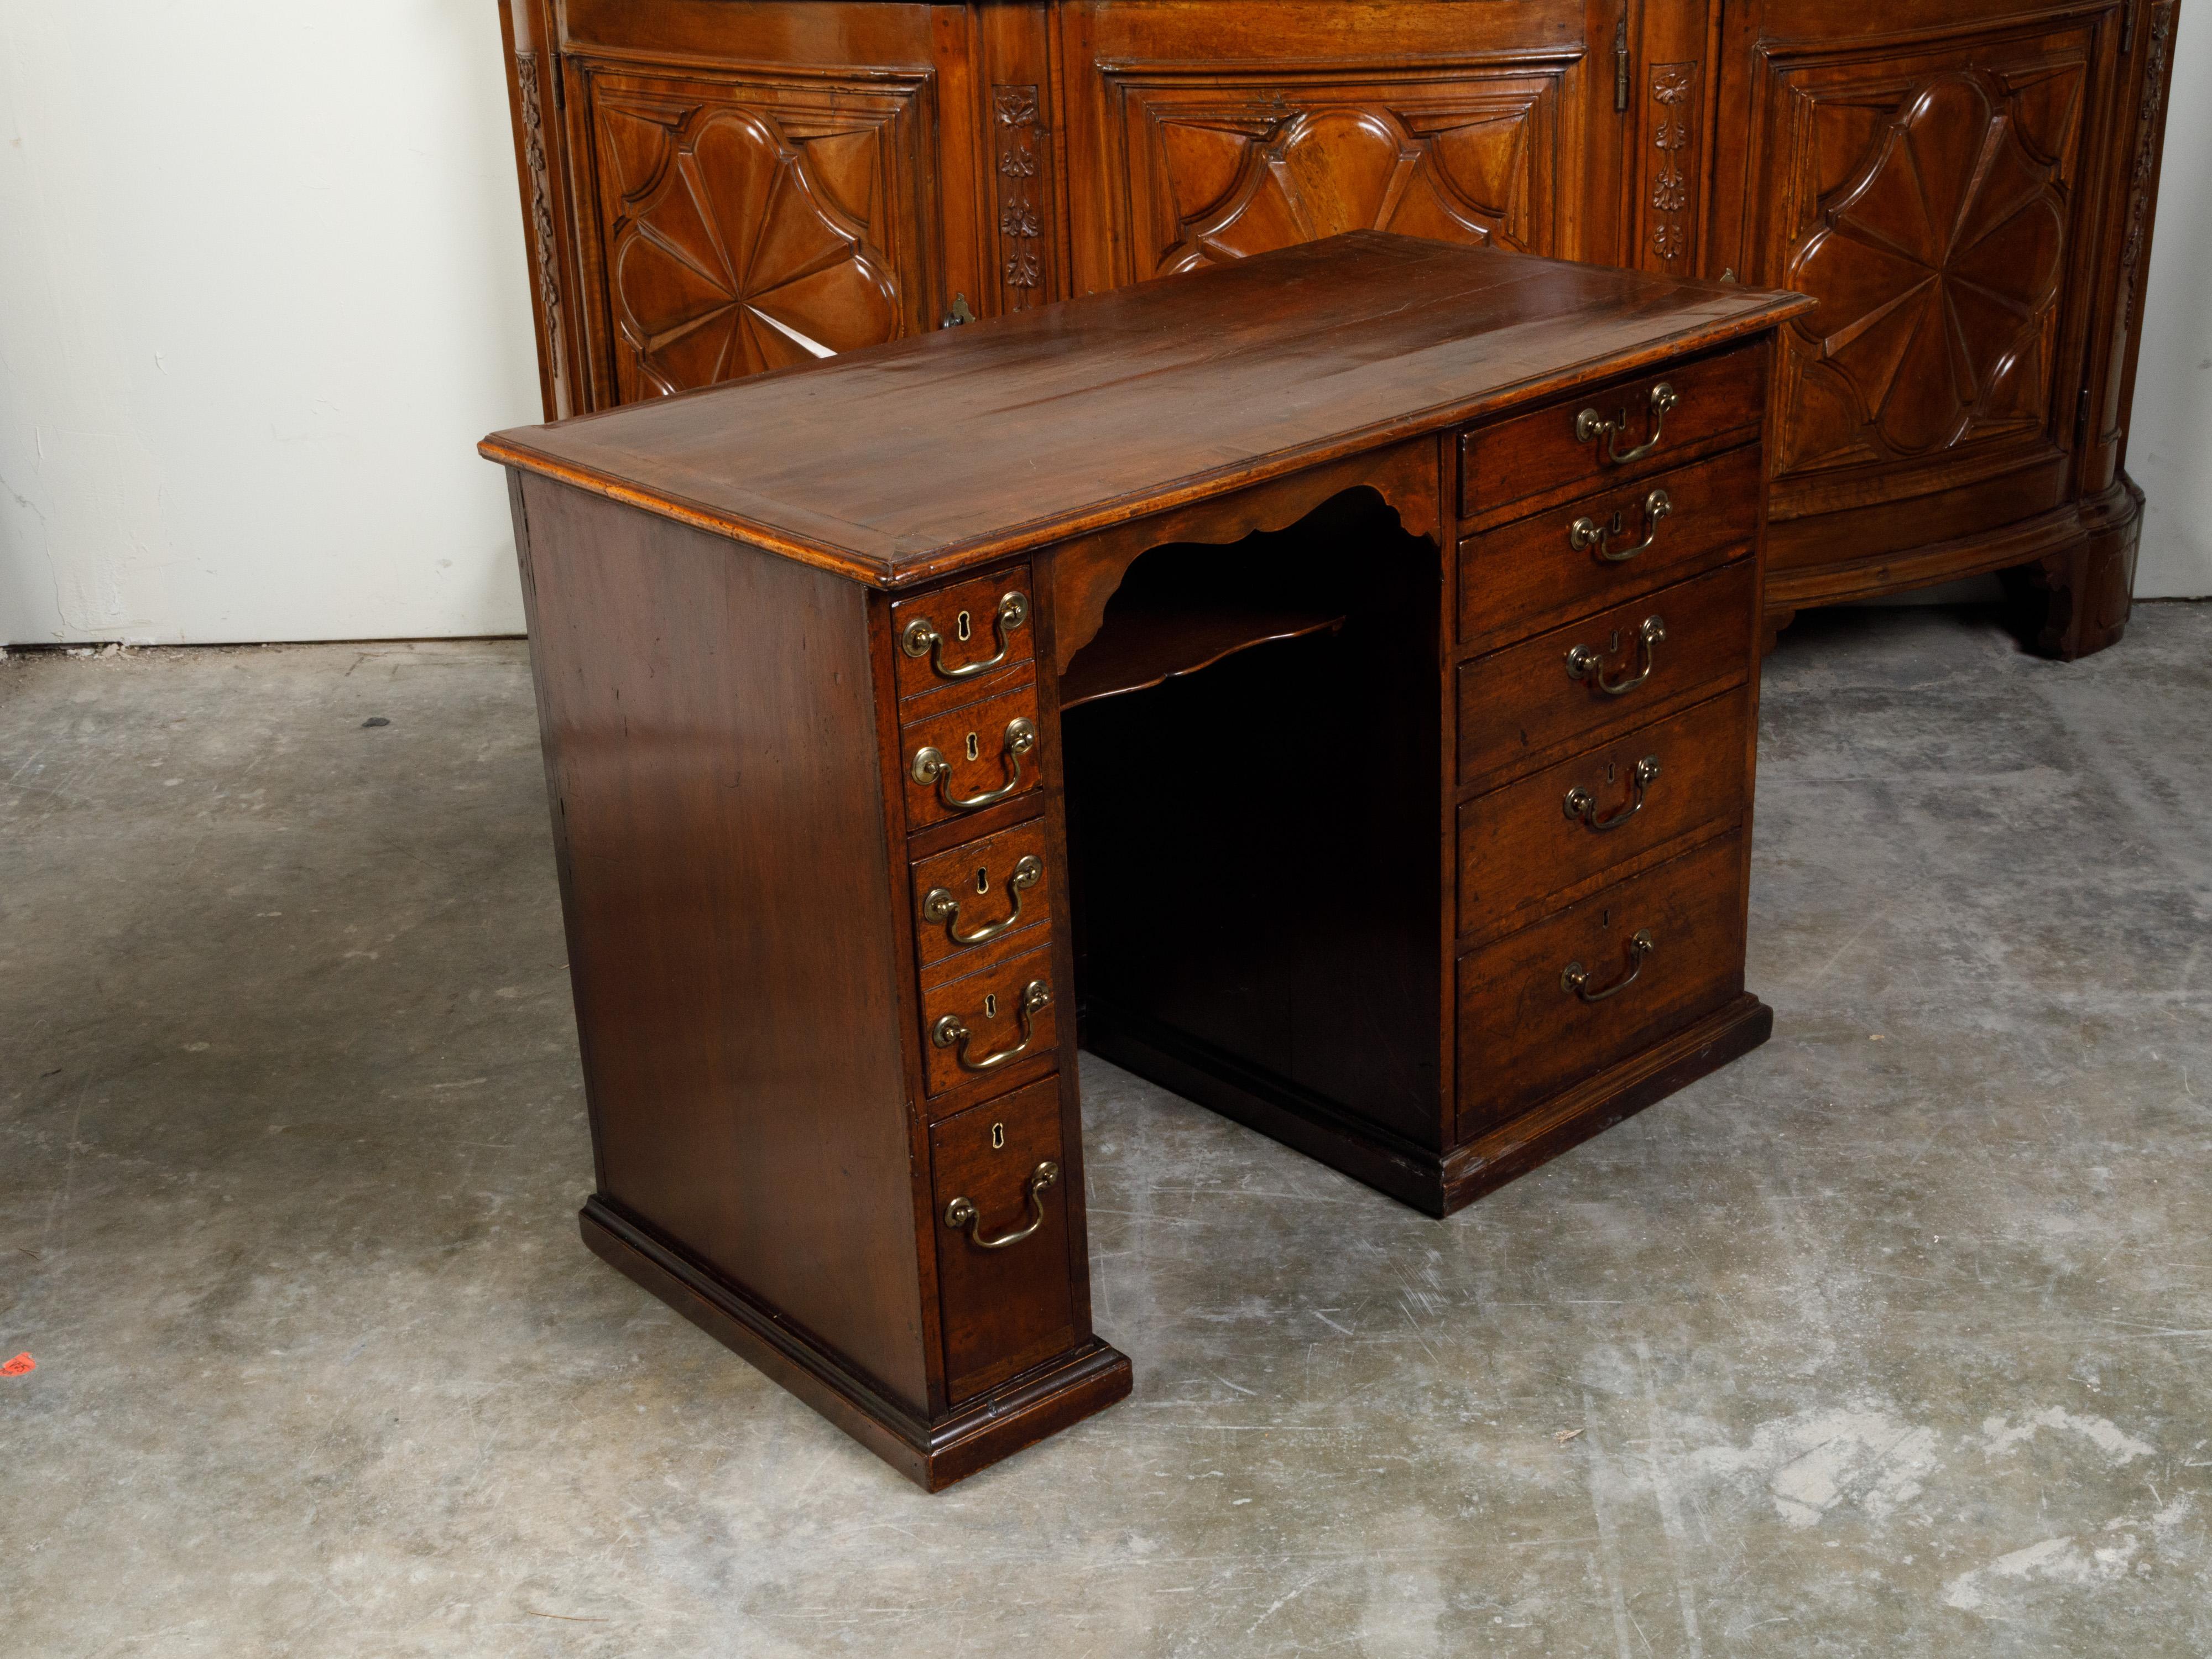 English Georgian Period Mahogany Desk with Ten Graduating Drawers and Shelf For Sale 2